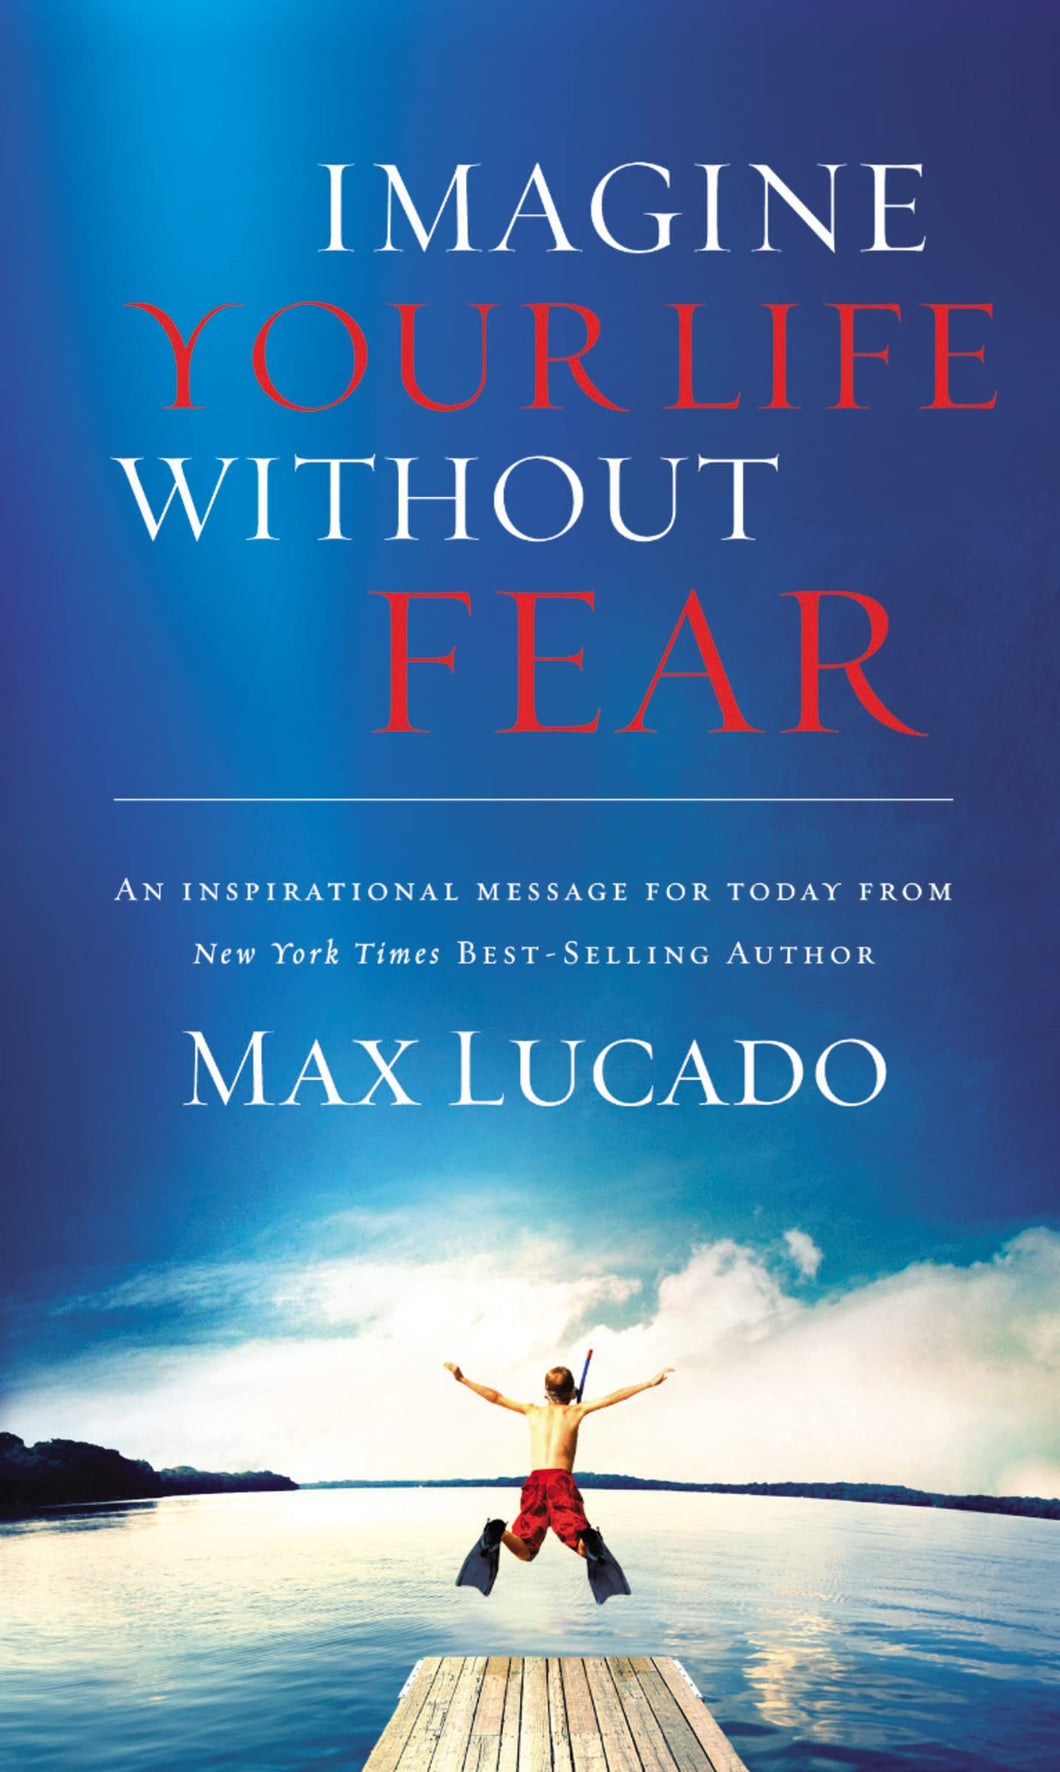 Max Lucado Imagine Your Life Without Fear (booklet)